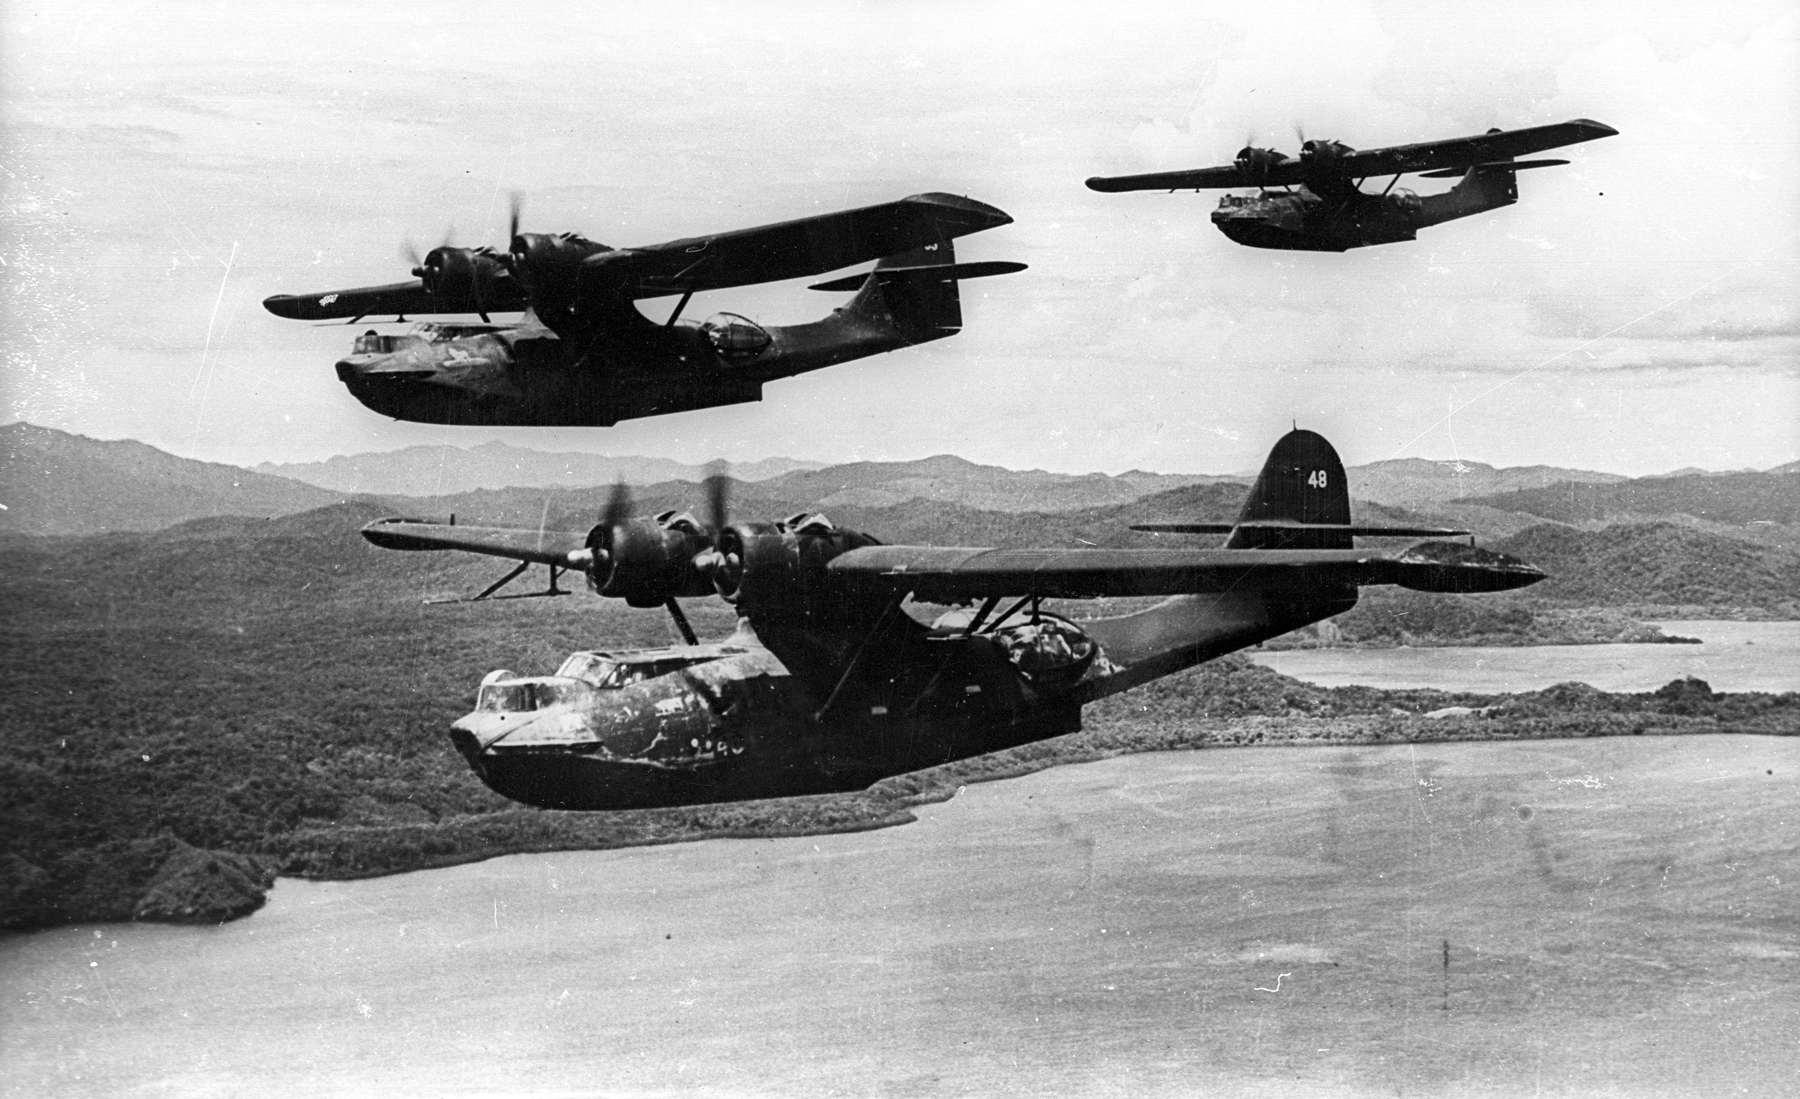 Three US Navy PBY-5A Catalina aircraft of VP-52 in flight in the southwest Pacific, Dec 1943